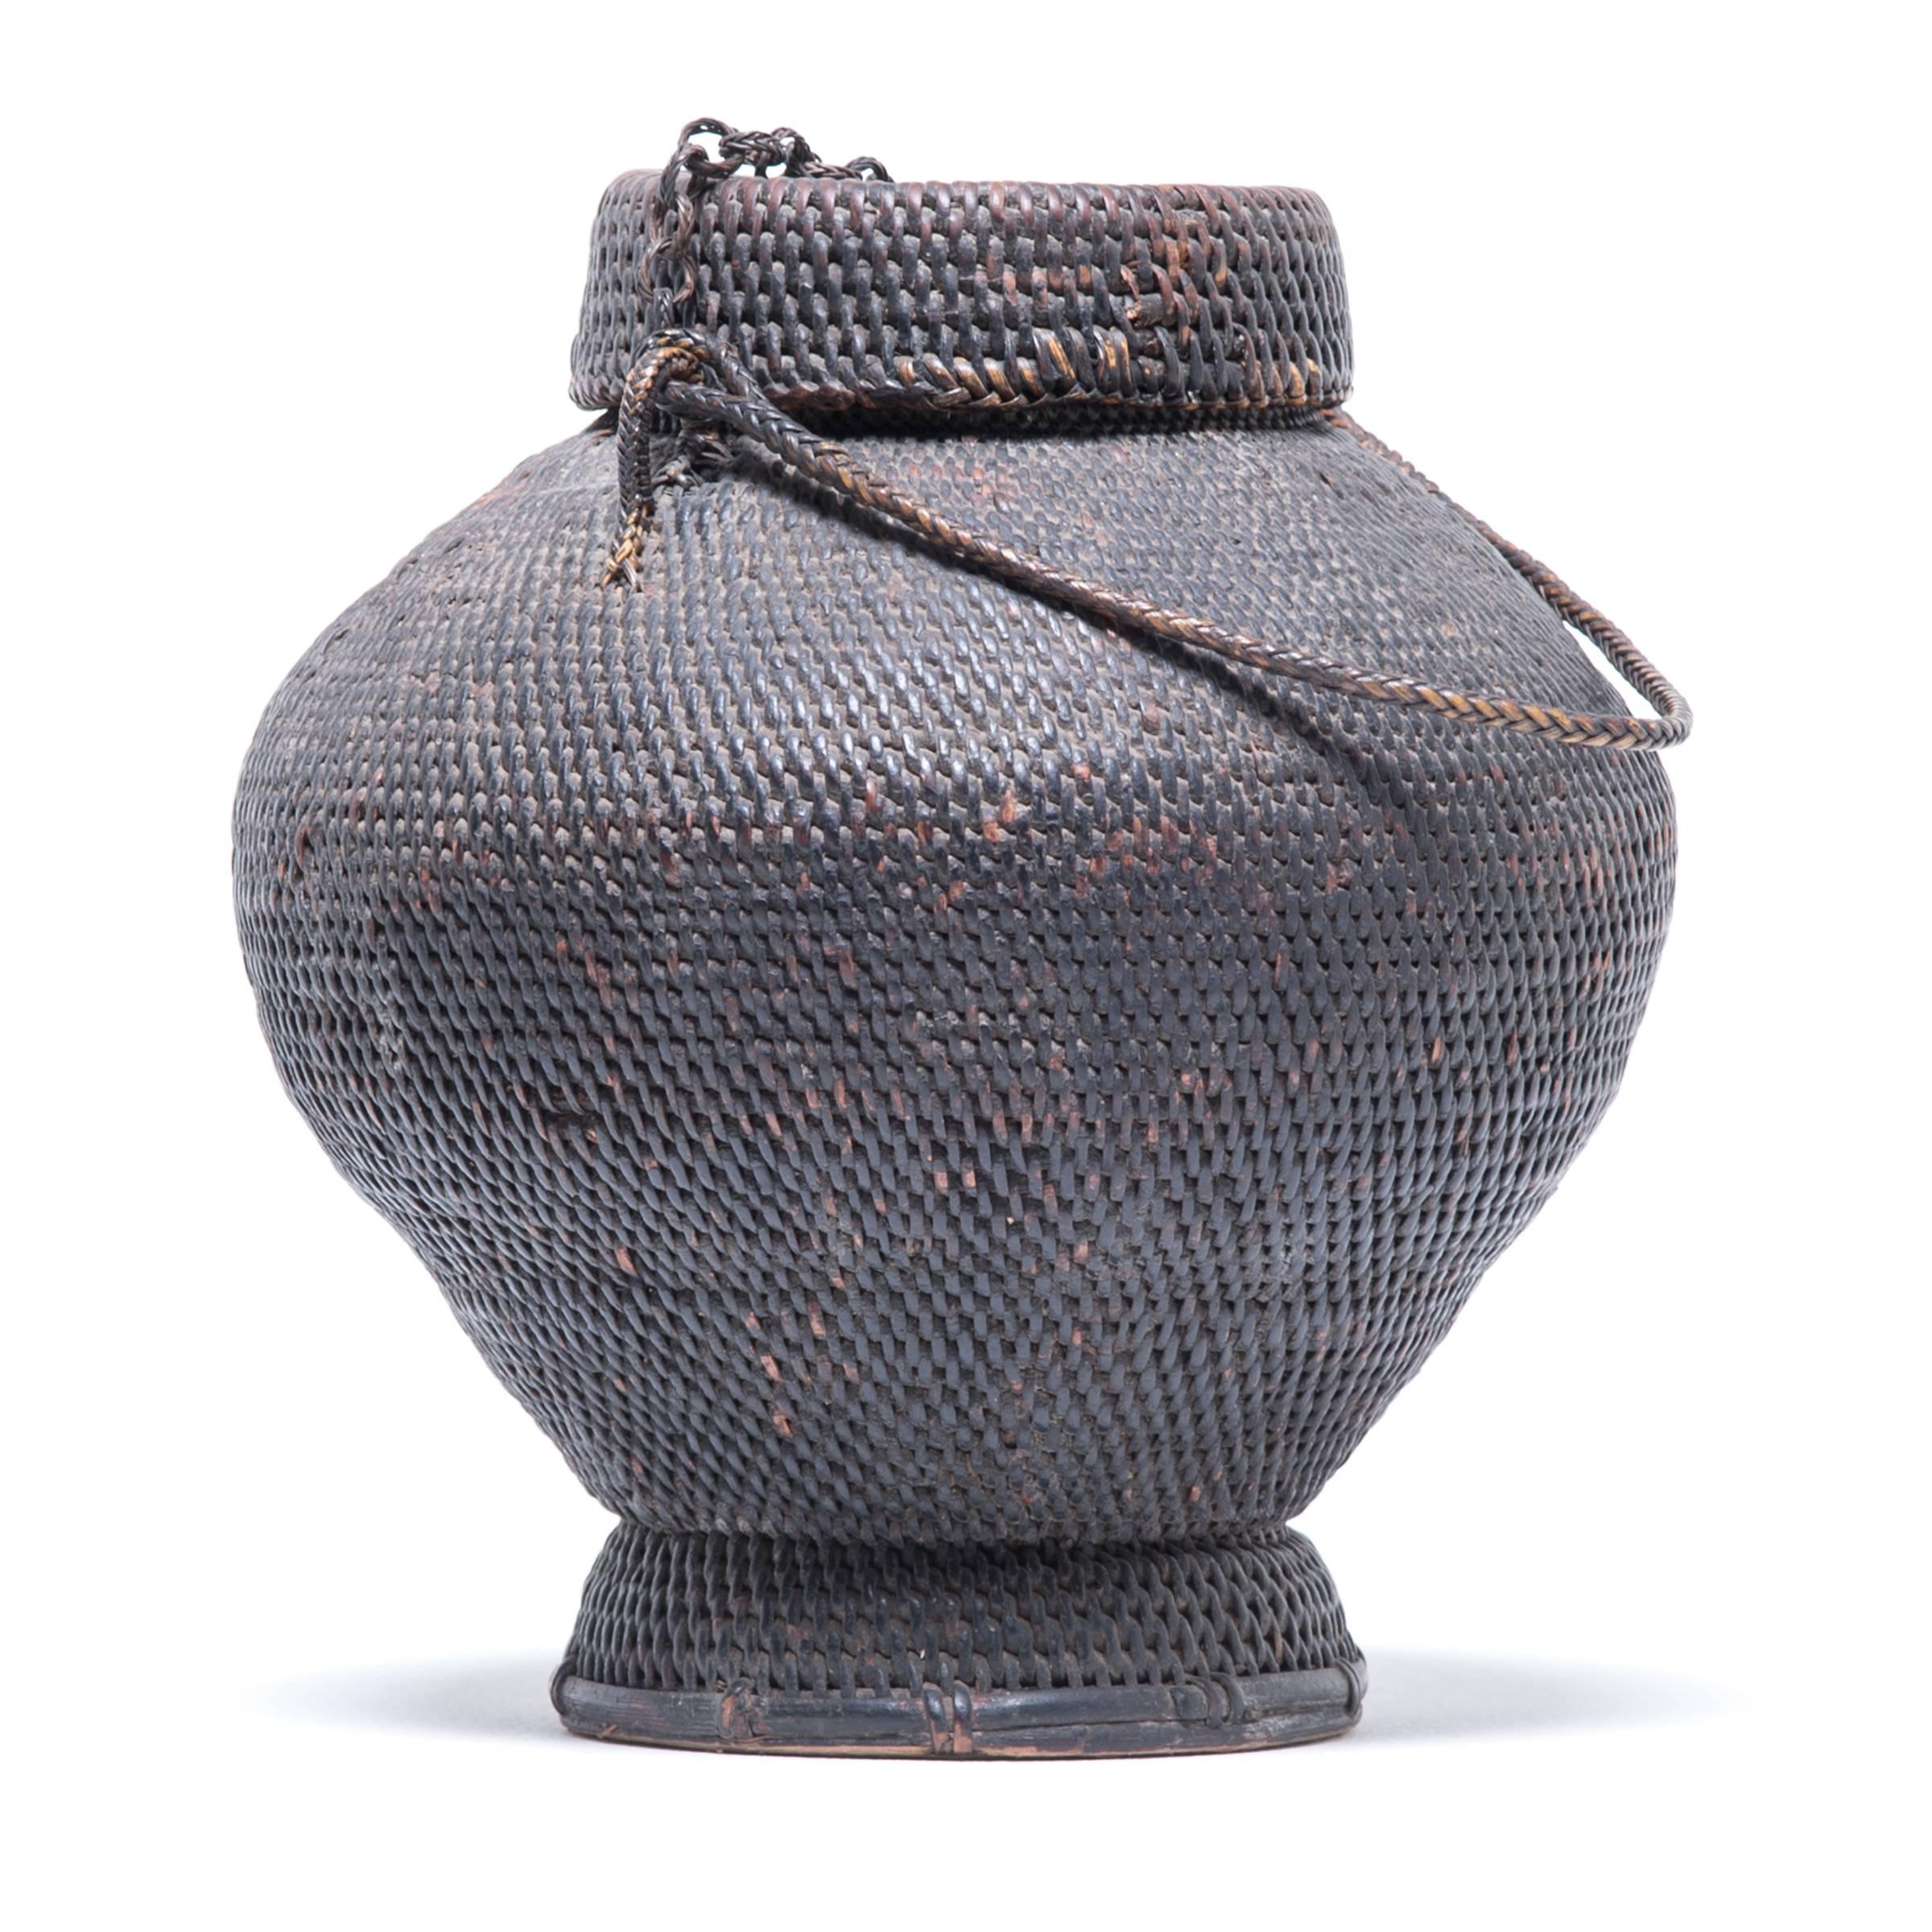 Woven Filipino Basket with Lid and Handle